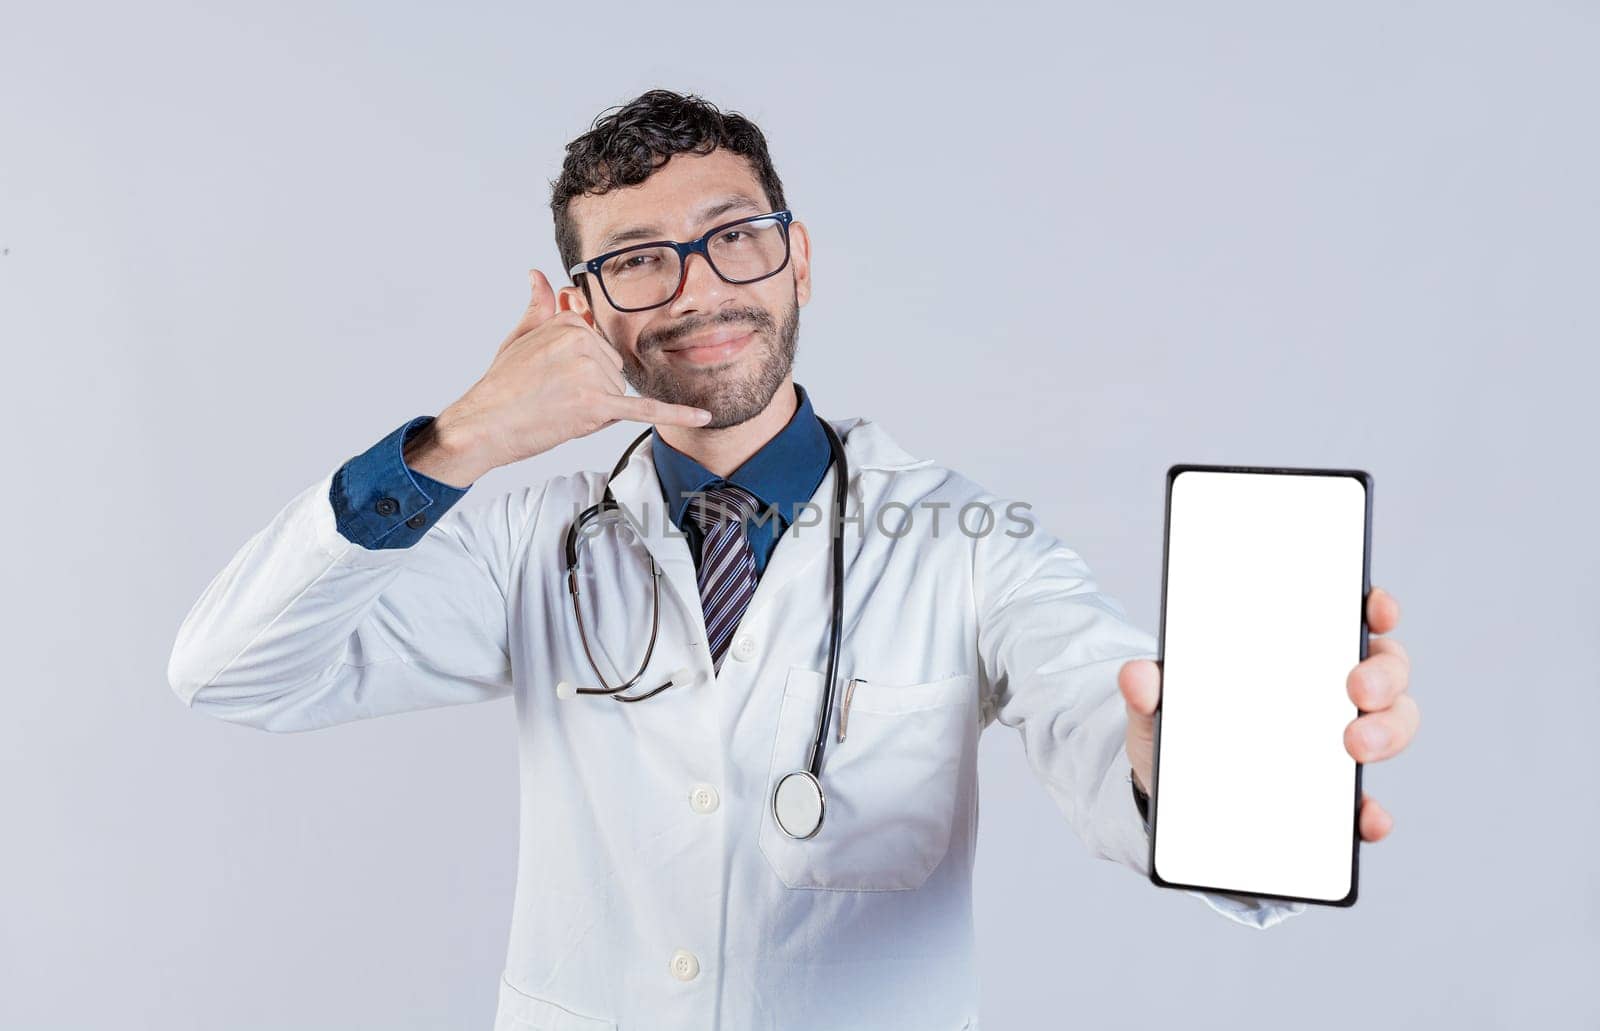 Handsome doctor showing cellphone screen gesturing call me. Happy doctor showing white screen of cellphone